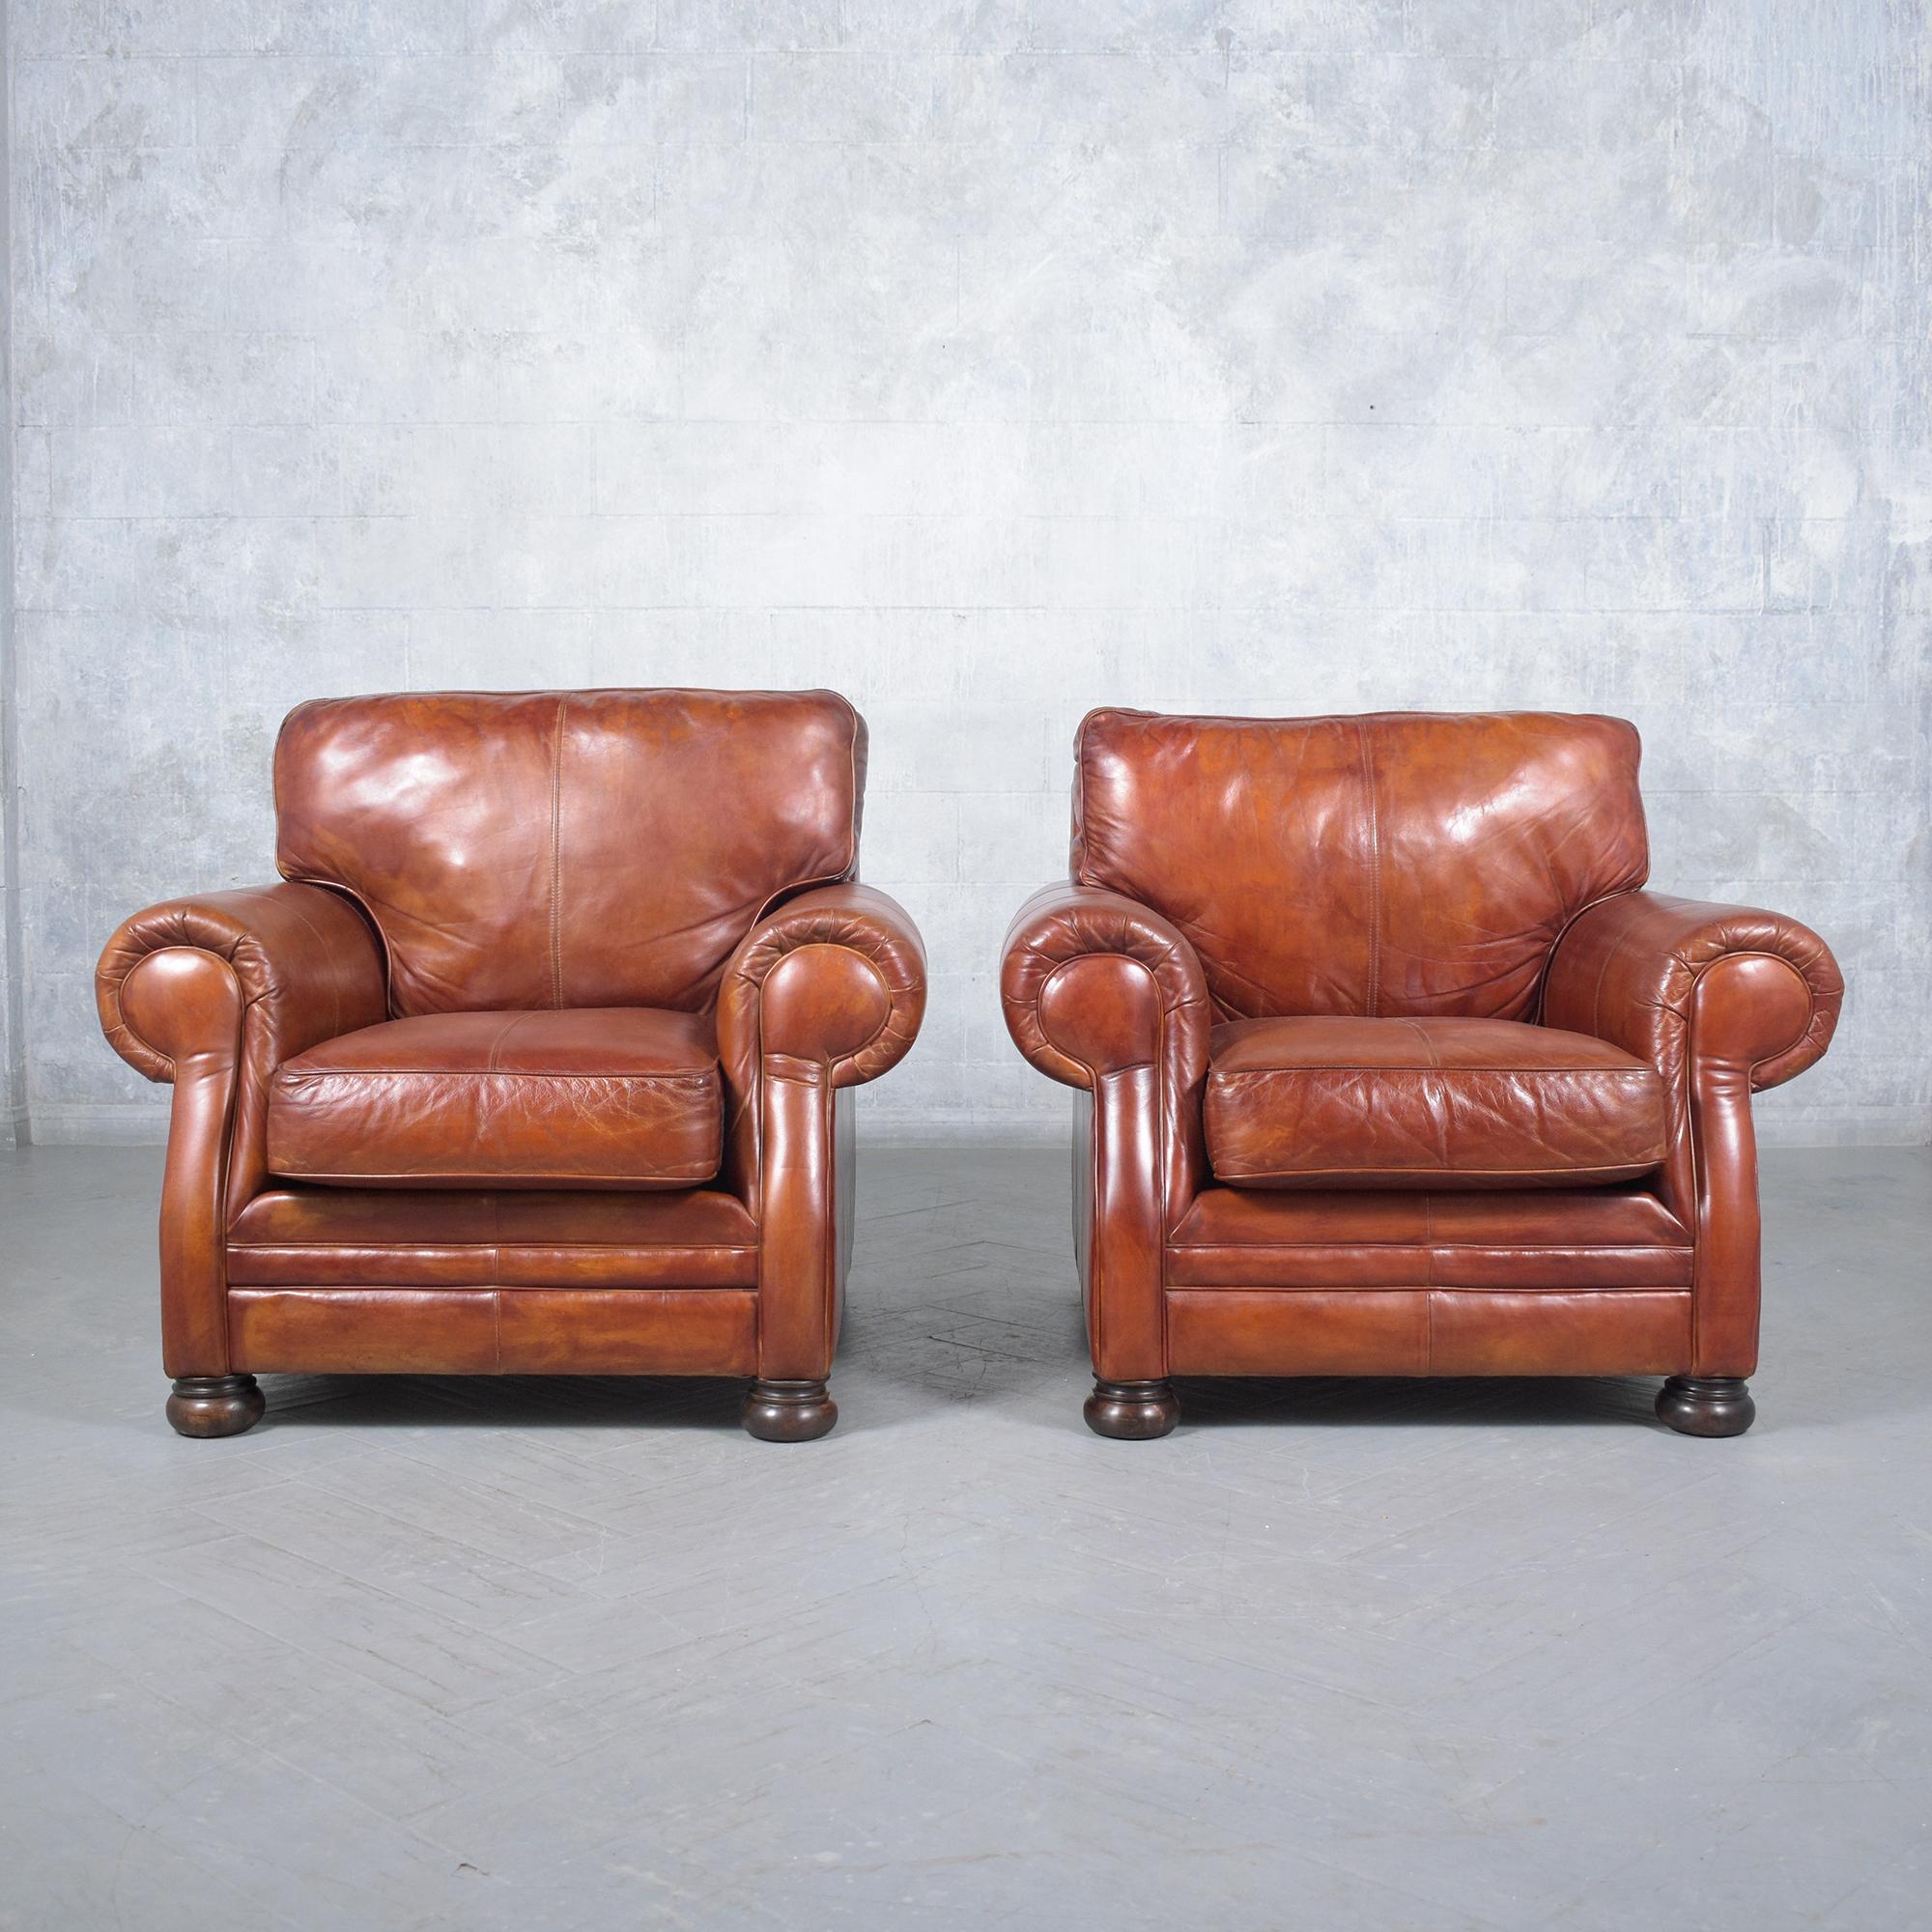 Experience the timeless elegance of our pair of vintage leather armchairs, each meticulously restored by our team of expert craftsmen. These vintage club chairs encapsulate the essence of classic design and exceptional craftsmanship, now presented